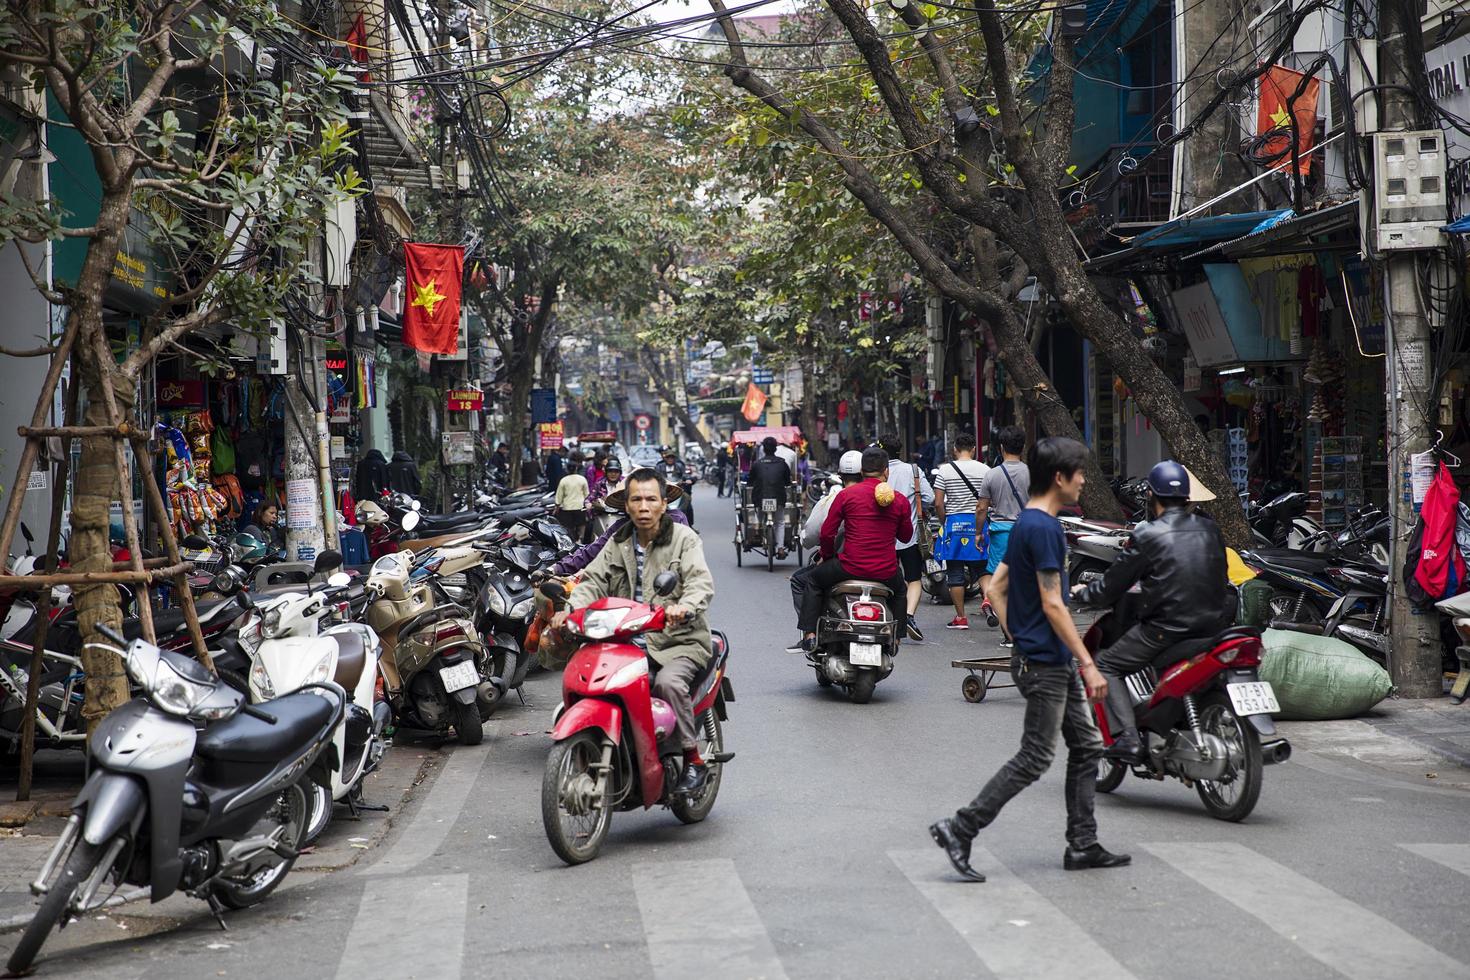 HANOI, VIETNAM, MARCH 2, 2017 - Unidentified people on the street of Hanoi, Vietnam. At Hanoi, motorbikes have overtaken bicycles as the main form of transportation. photo